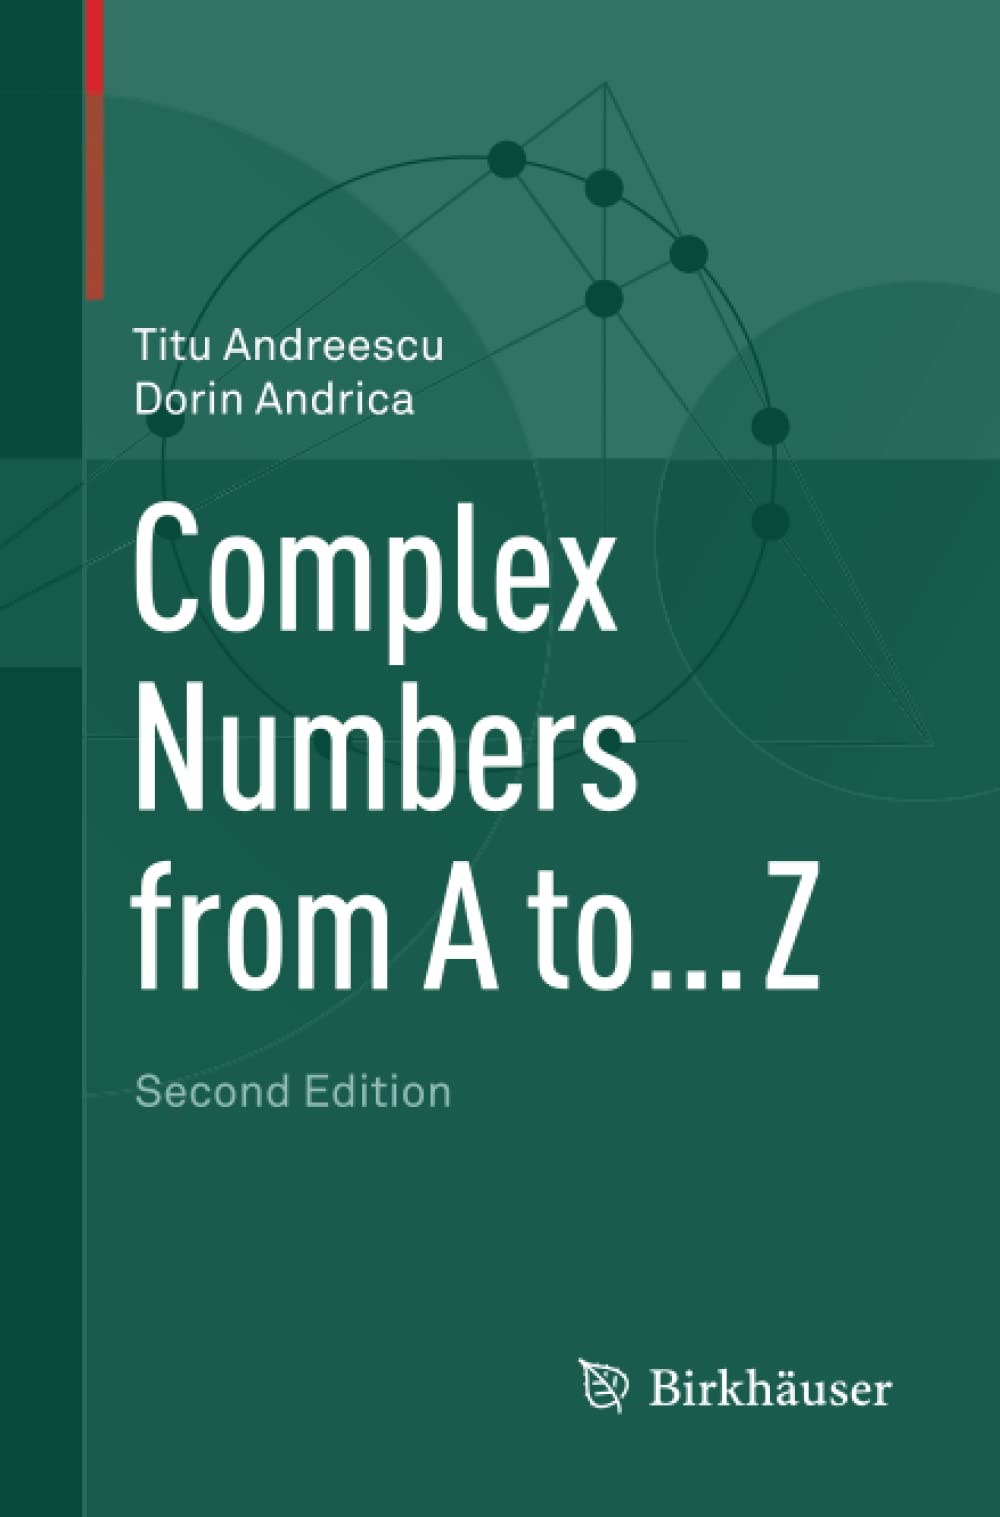 Complex Numbers from A to ... Z